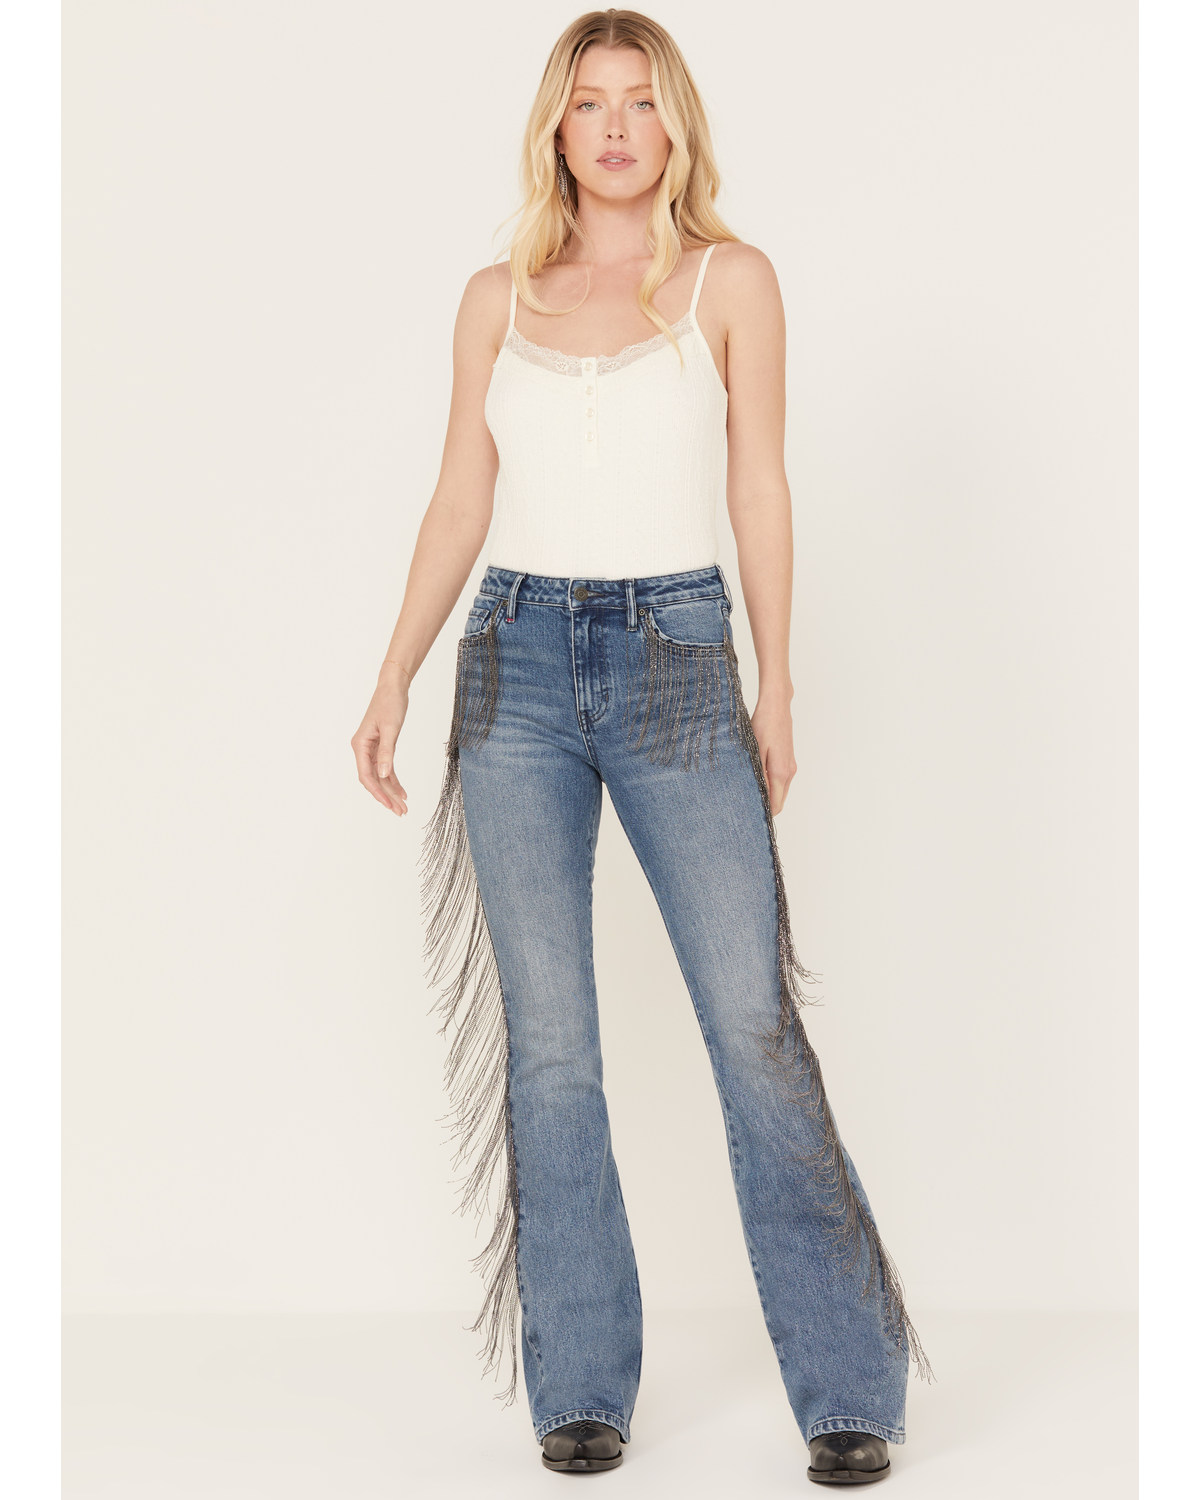 Idyllwind Women's Carlyle Place High Risin' Fringe Bootcut Jeans